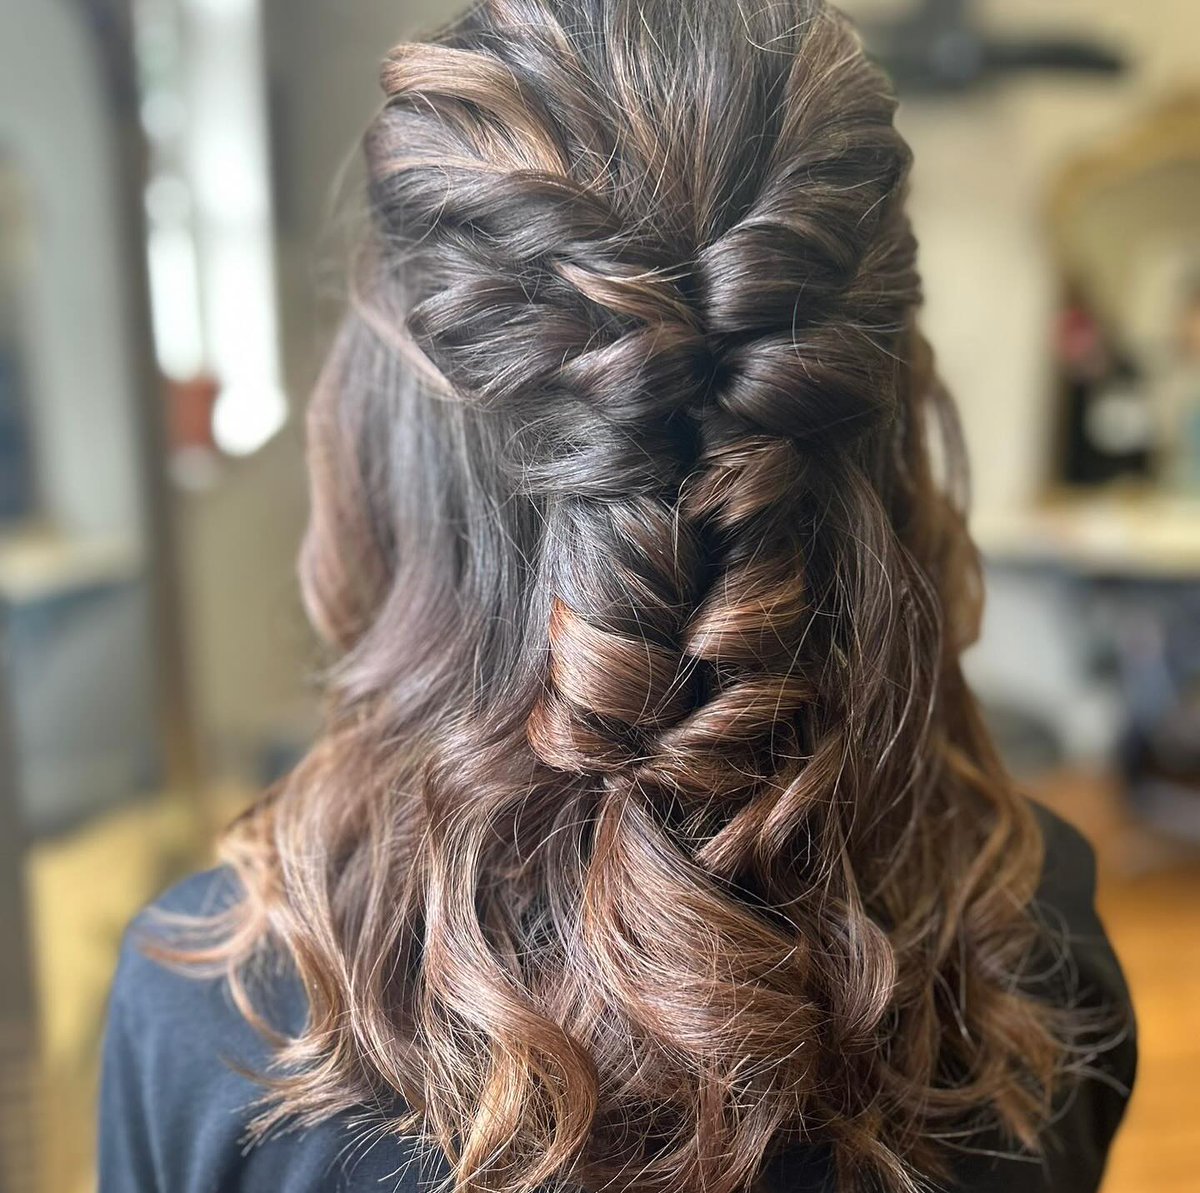 Craving wedding day hair inspo? Our senior stylist, Louisa, works her magic to create stunning updos for your special occasions, from weddings to proms.
#HairInspiration #hairup #weddinghair #hairtransformation #avedaukpro #aveda #robinjamesdorchester #robinjamessherborne